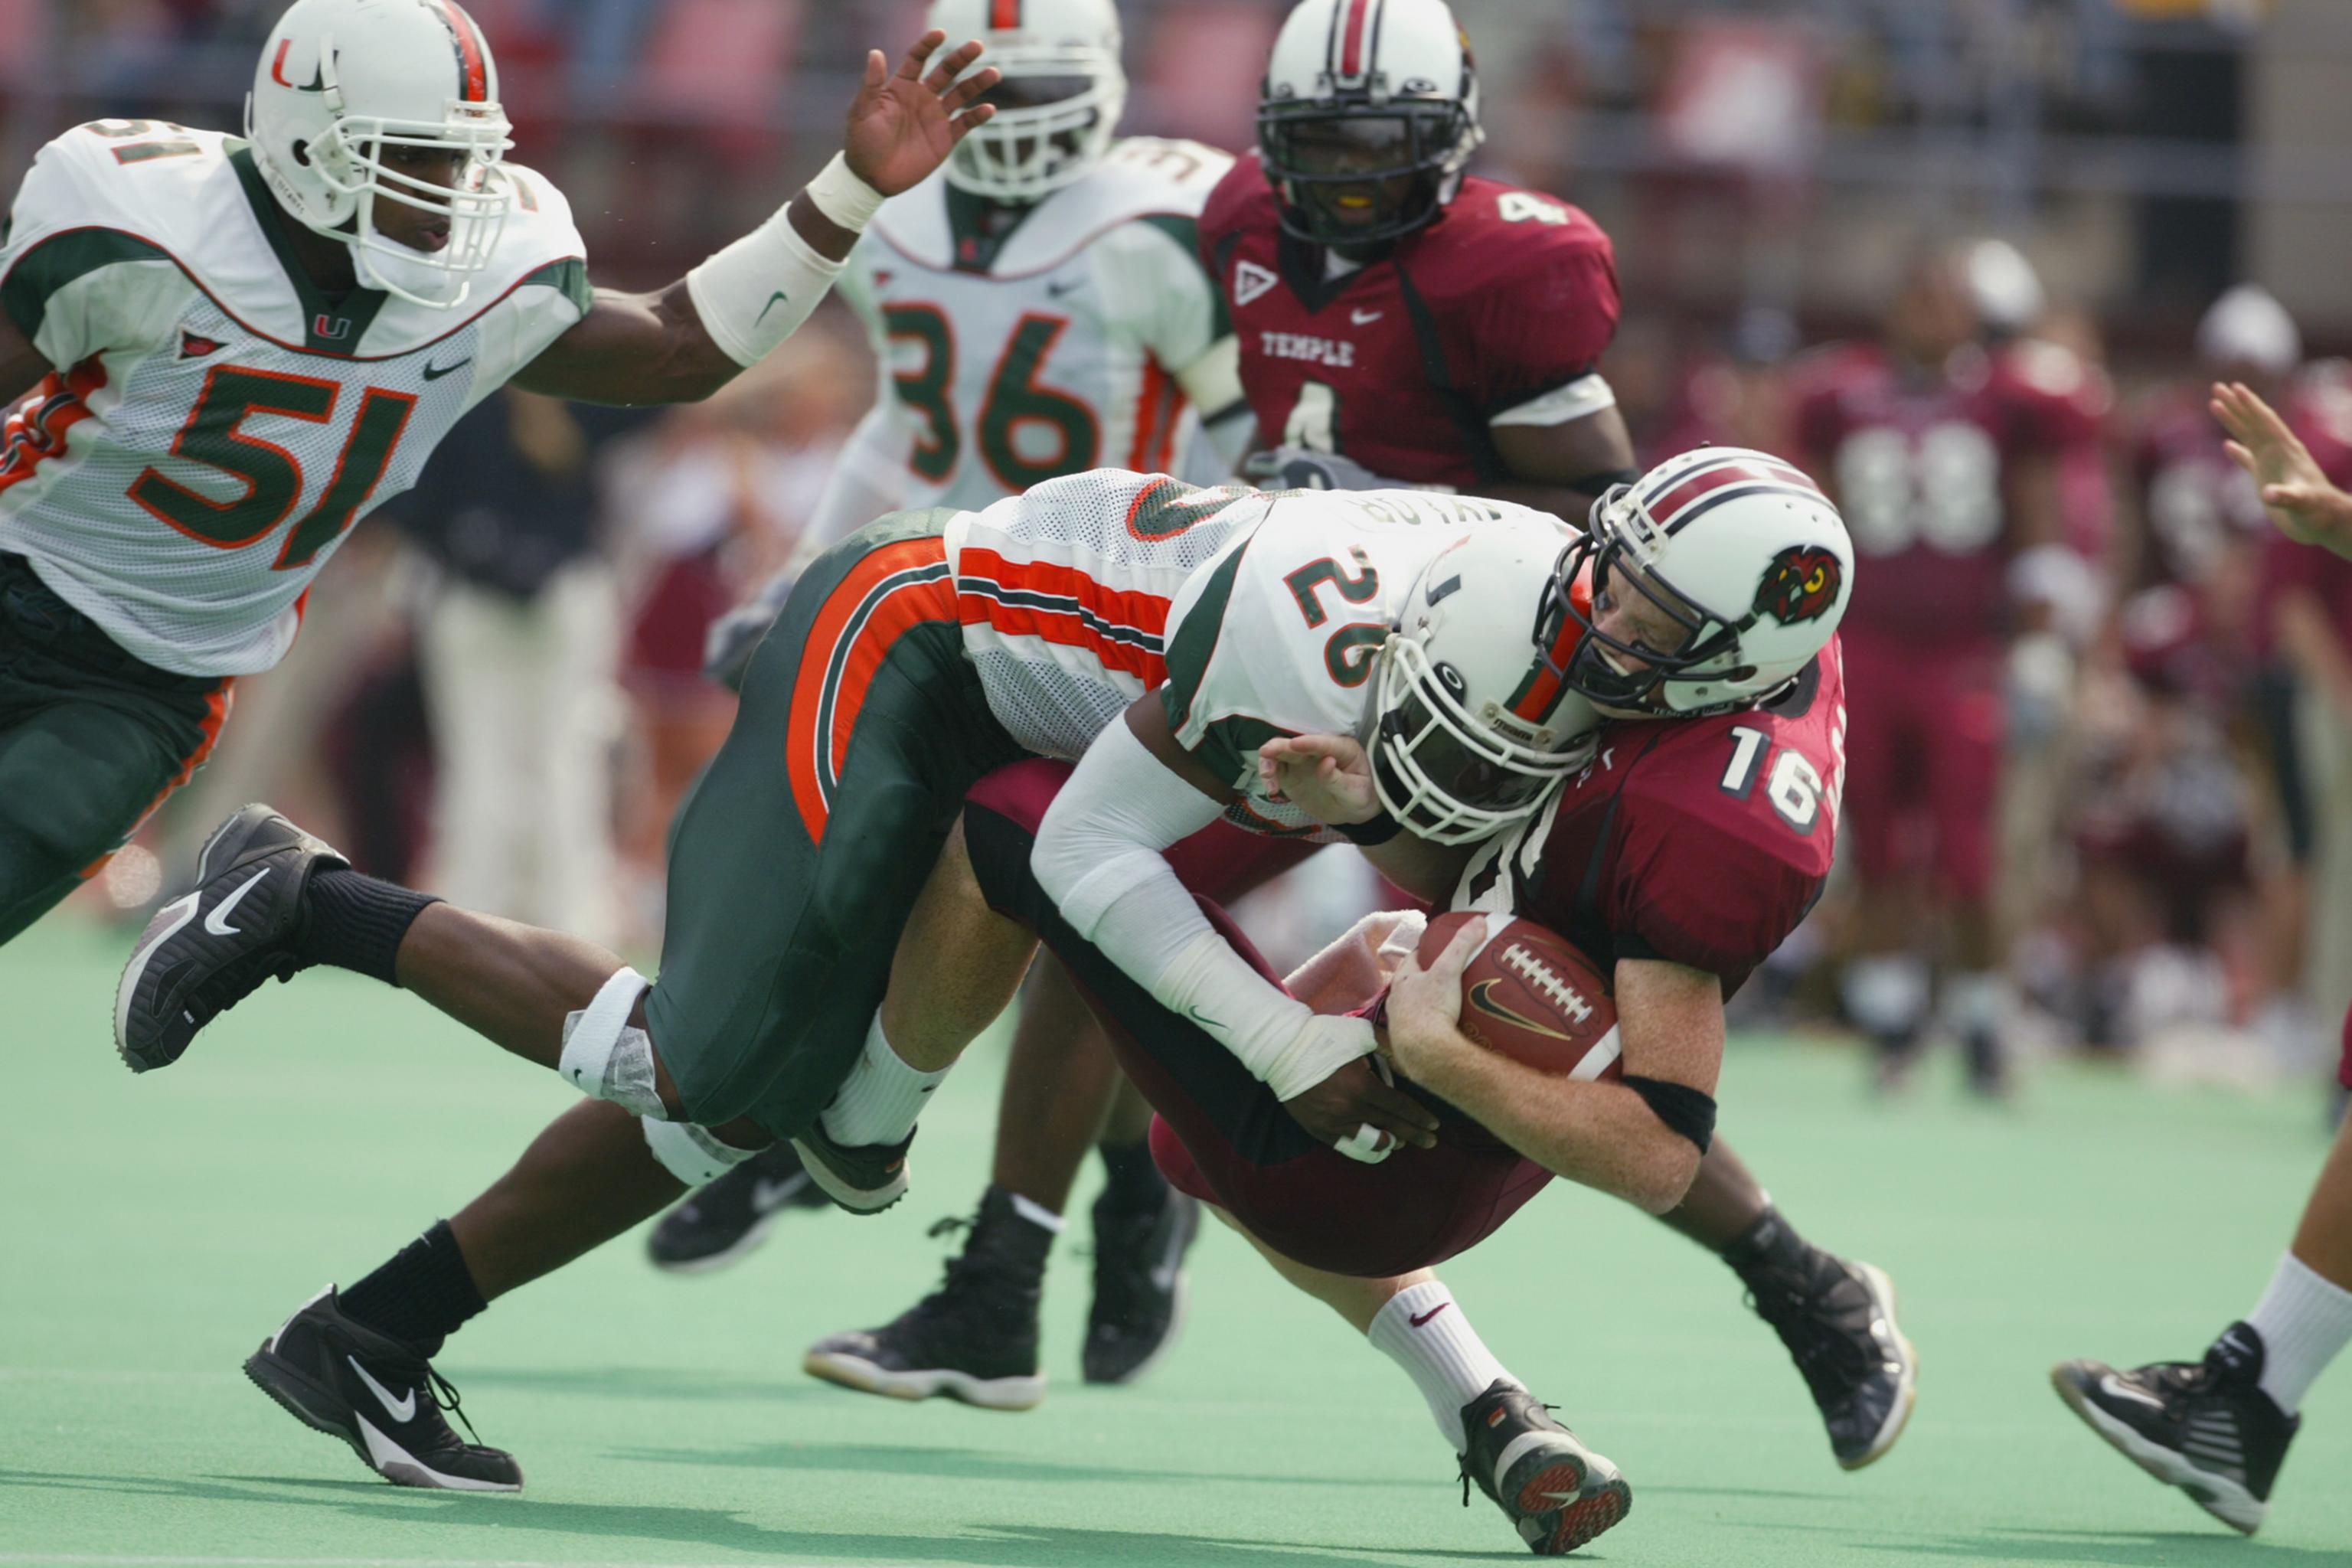 Sean Taylor inducted into University of Miami Sports Hall of Fame